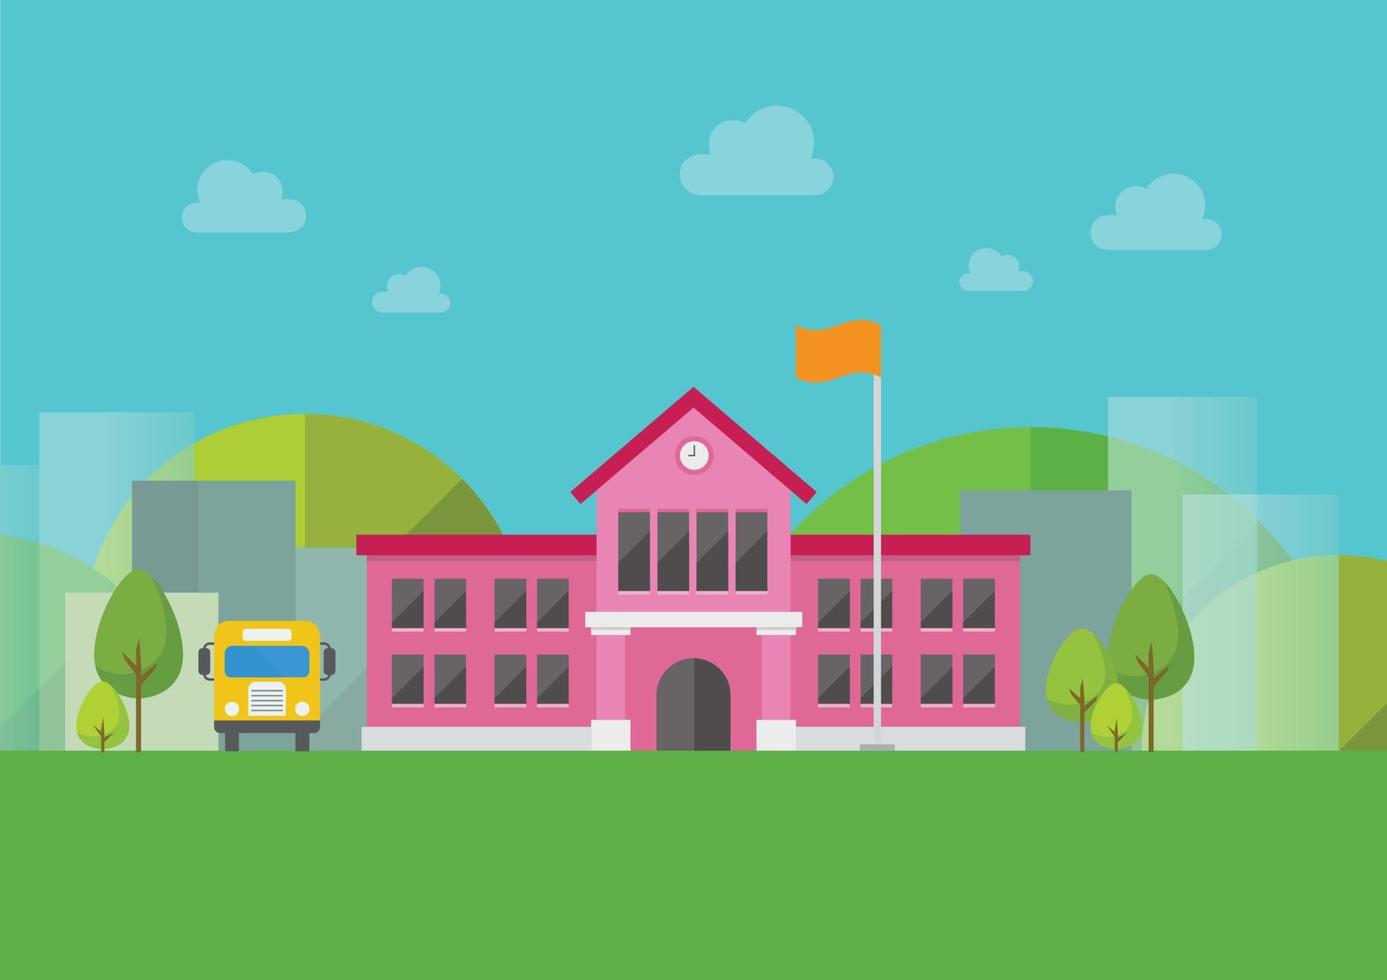 School building with urban landscape in background vector